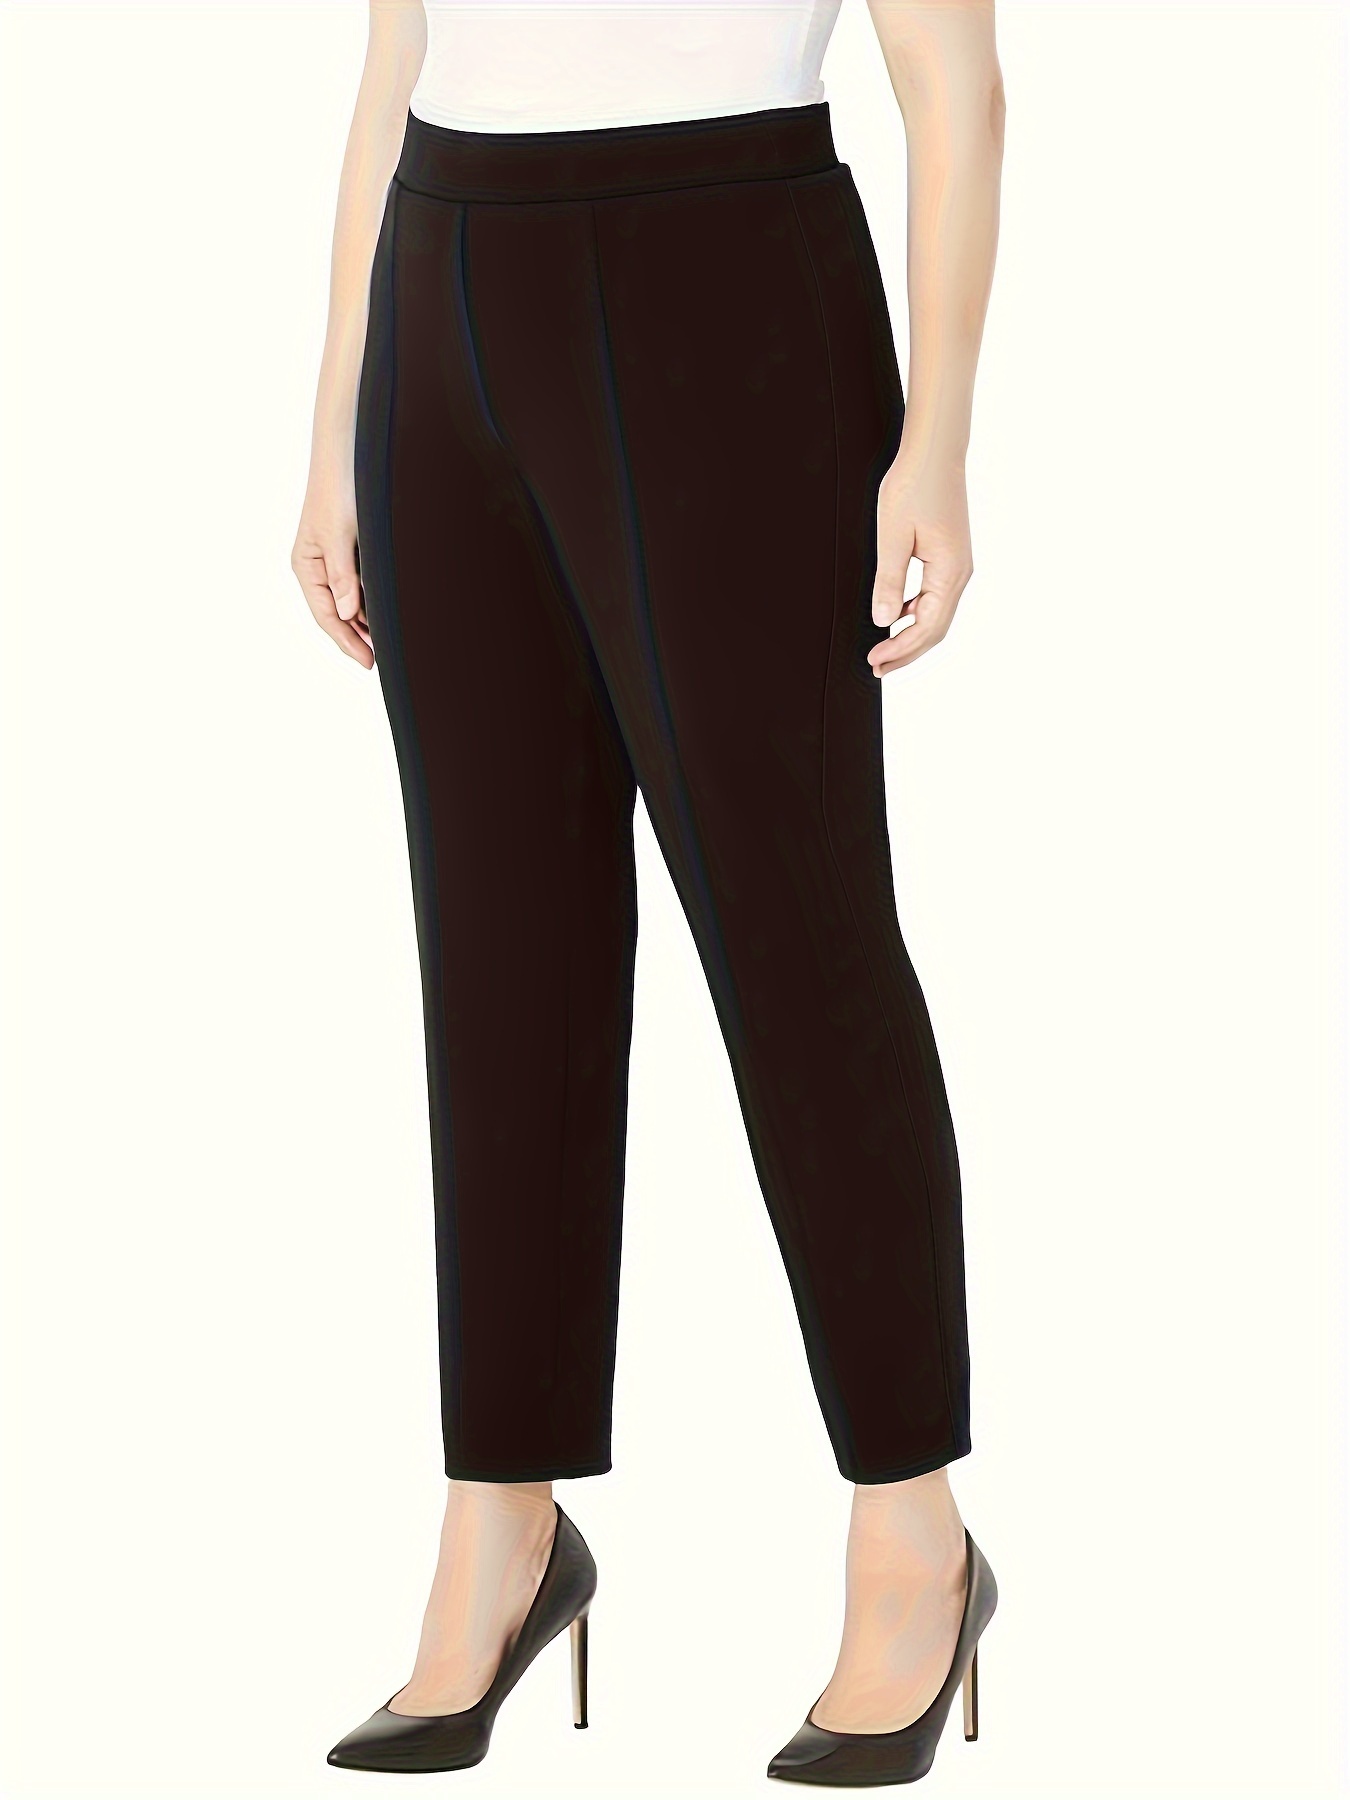 Plus Size Business Casual Pants, Women's Plus Solid Elastic High * Medium  Stretch Tapered Leg Trousers